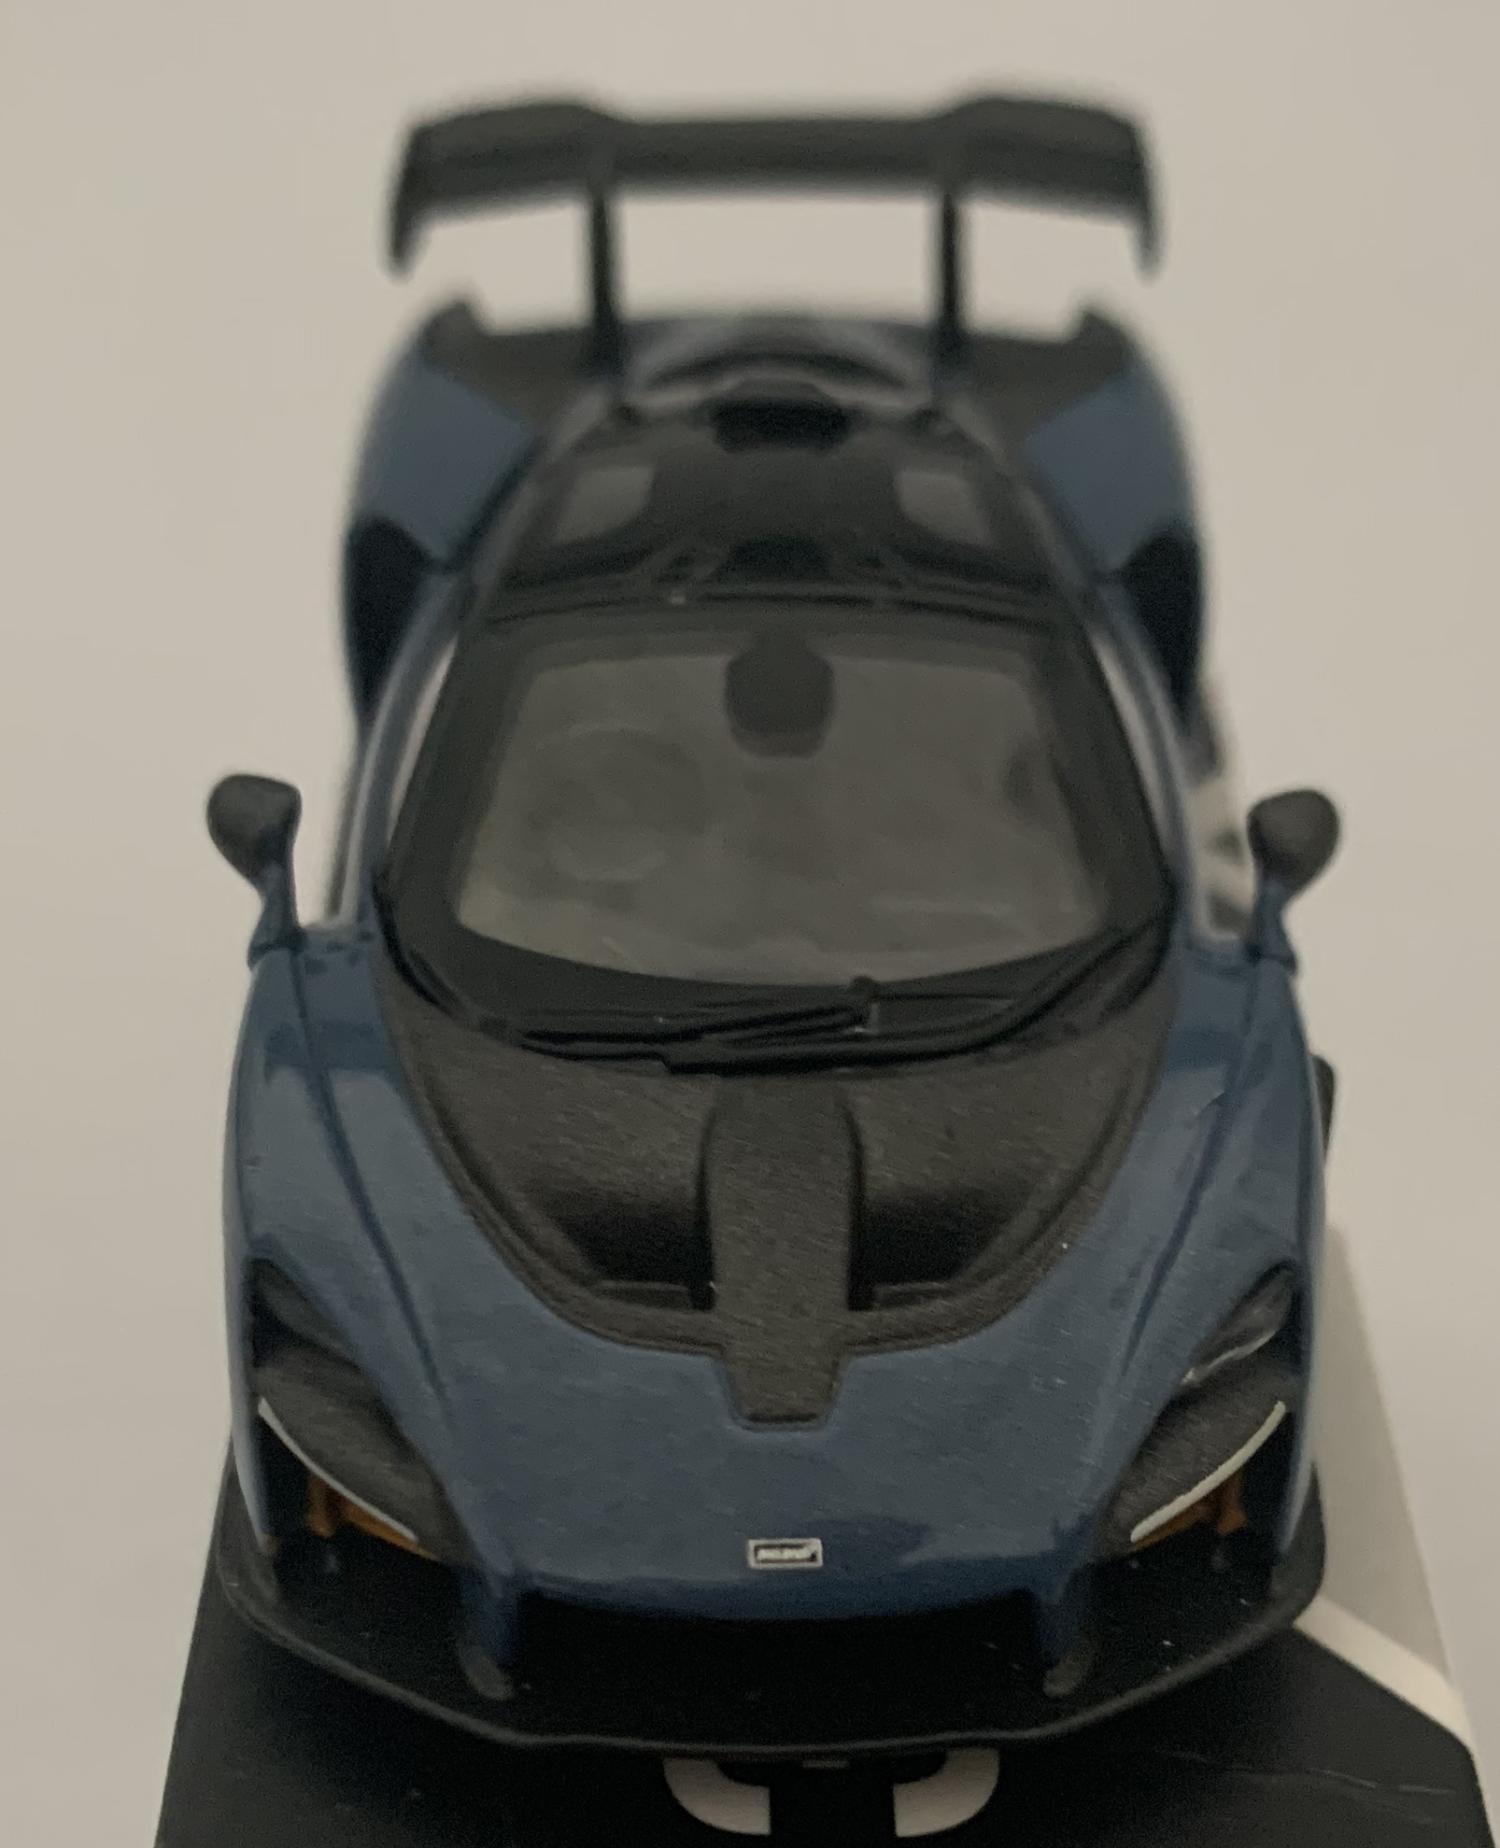 An excellent scale model of a McLaren Senna decorated in victory grey with black roof  and silver wheels.  Other trims are finished in black and yellow